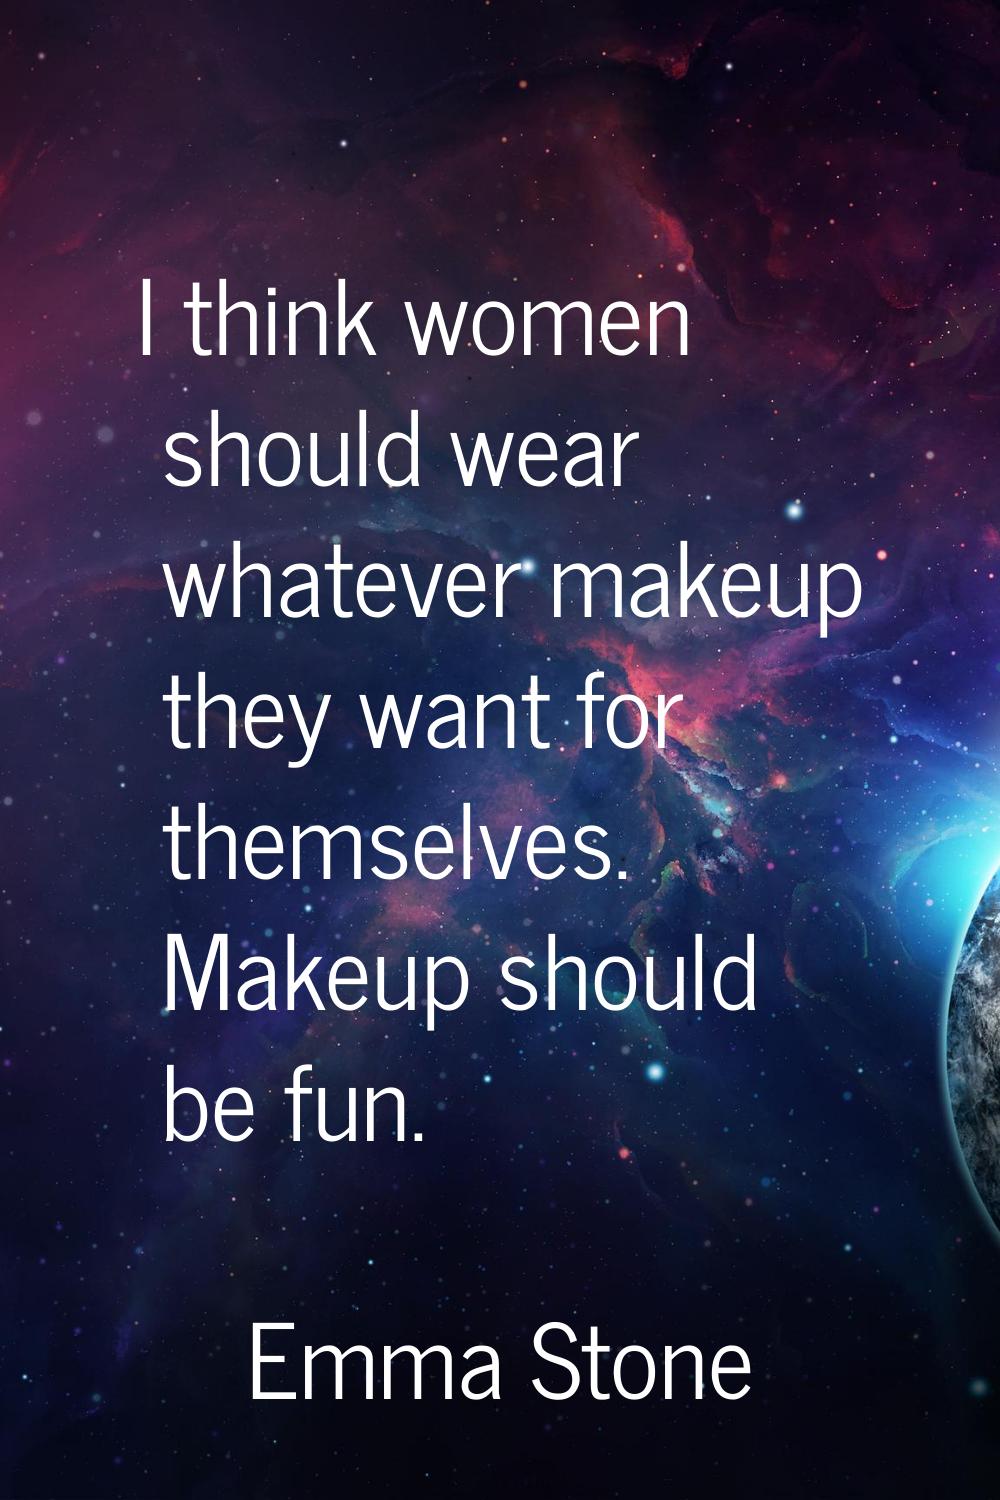 I think women should wear whatever makeup they want for themselves. Makeup should be fun.